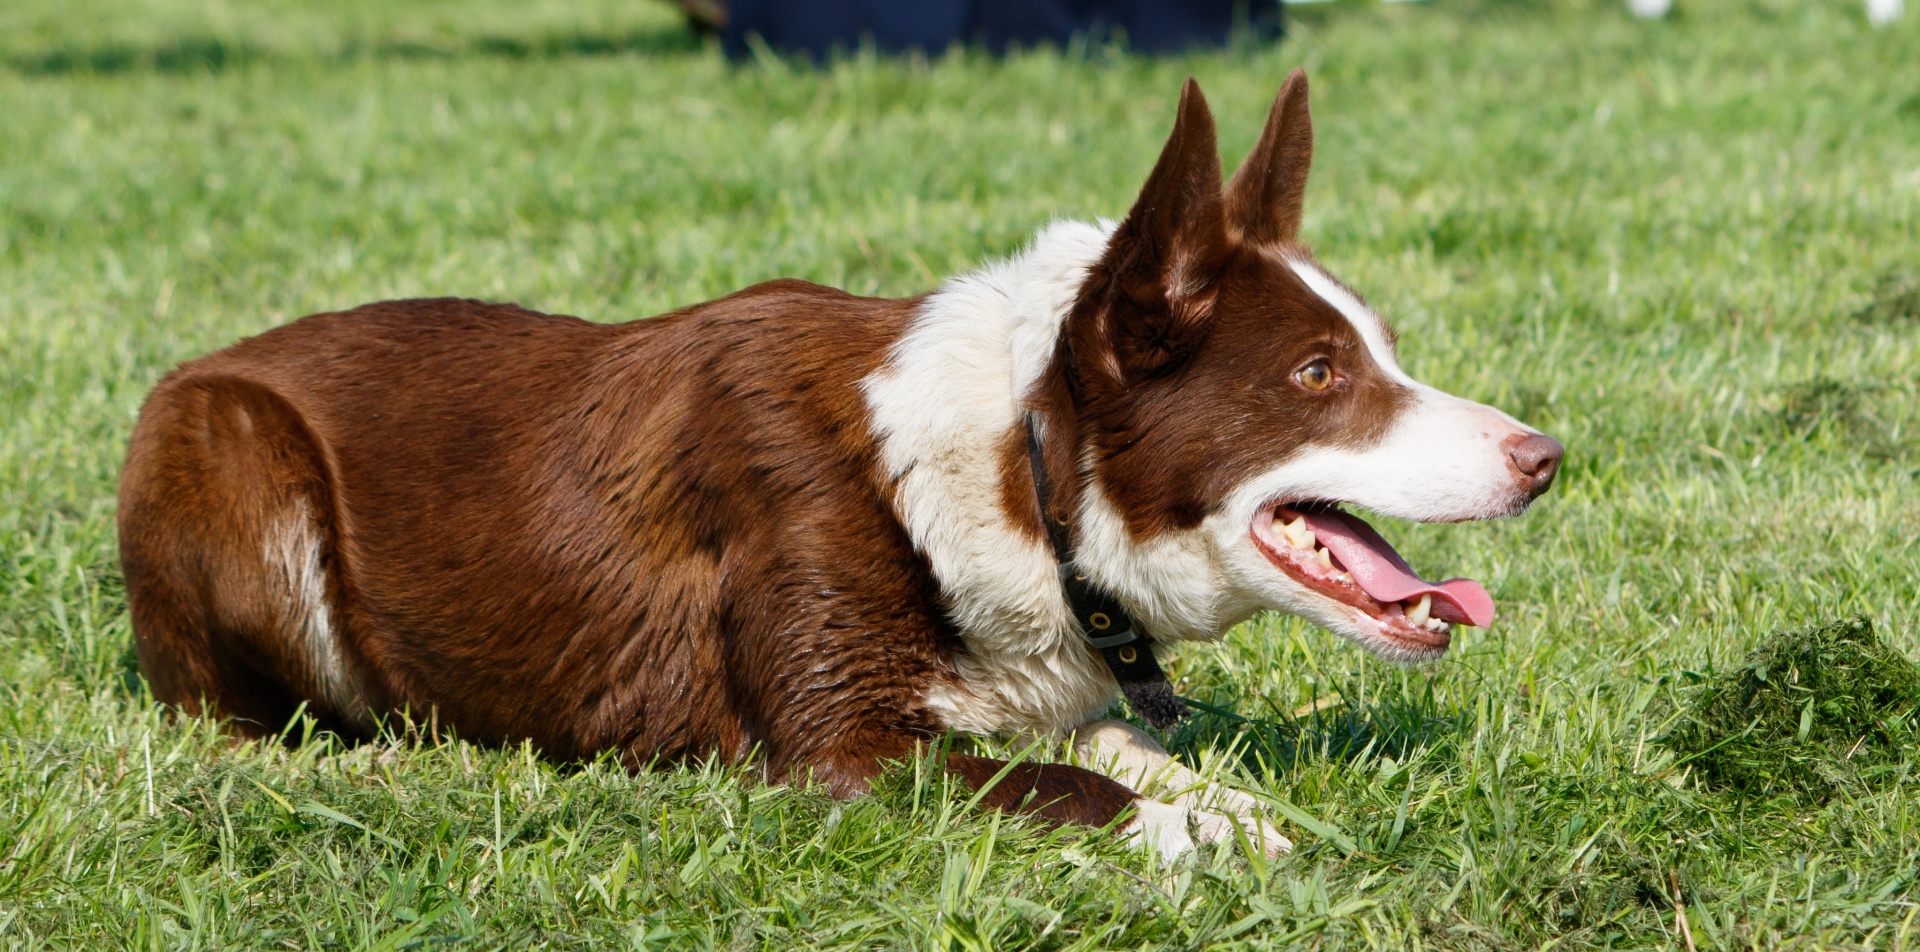 Close-up portrait of a border collie dog looking alert and laying on the green grass